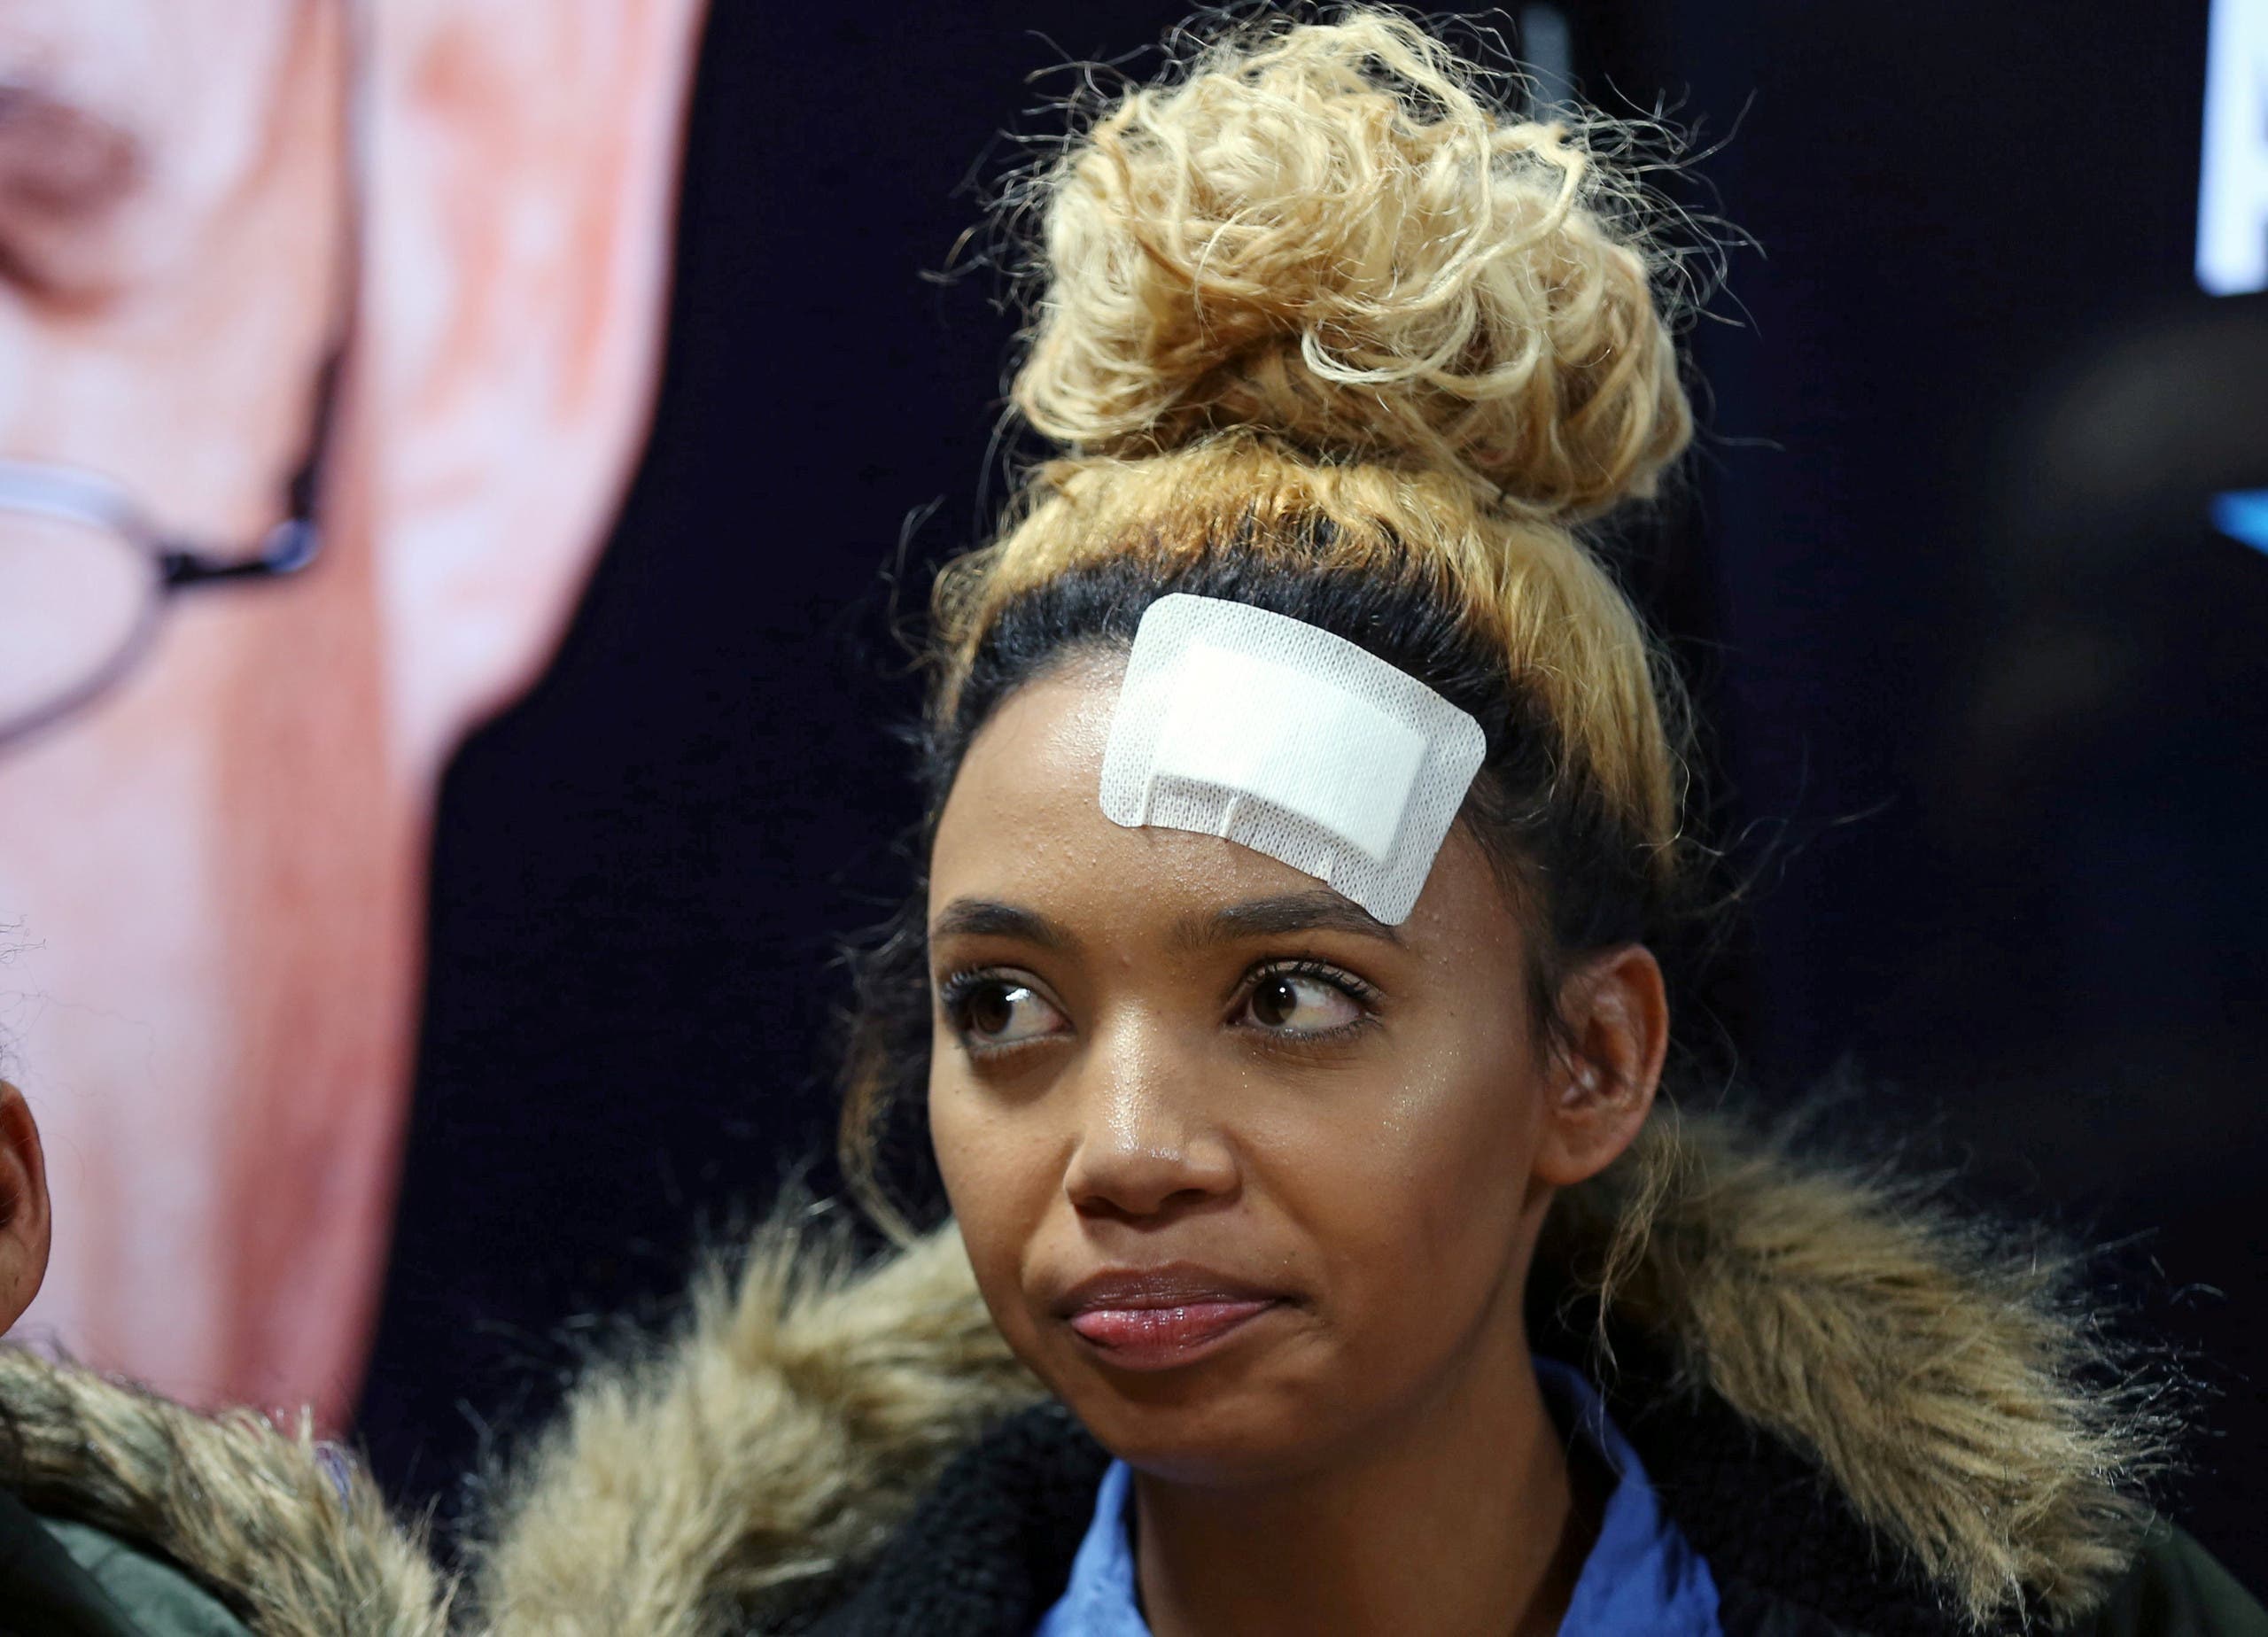 Gabriella Engels, who claims to have been assaulted by Grace Mugabe, arrives for a news conference in Pretoria, South Africa, August 17, 2017. (reuters)